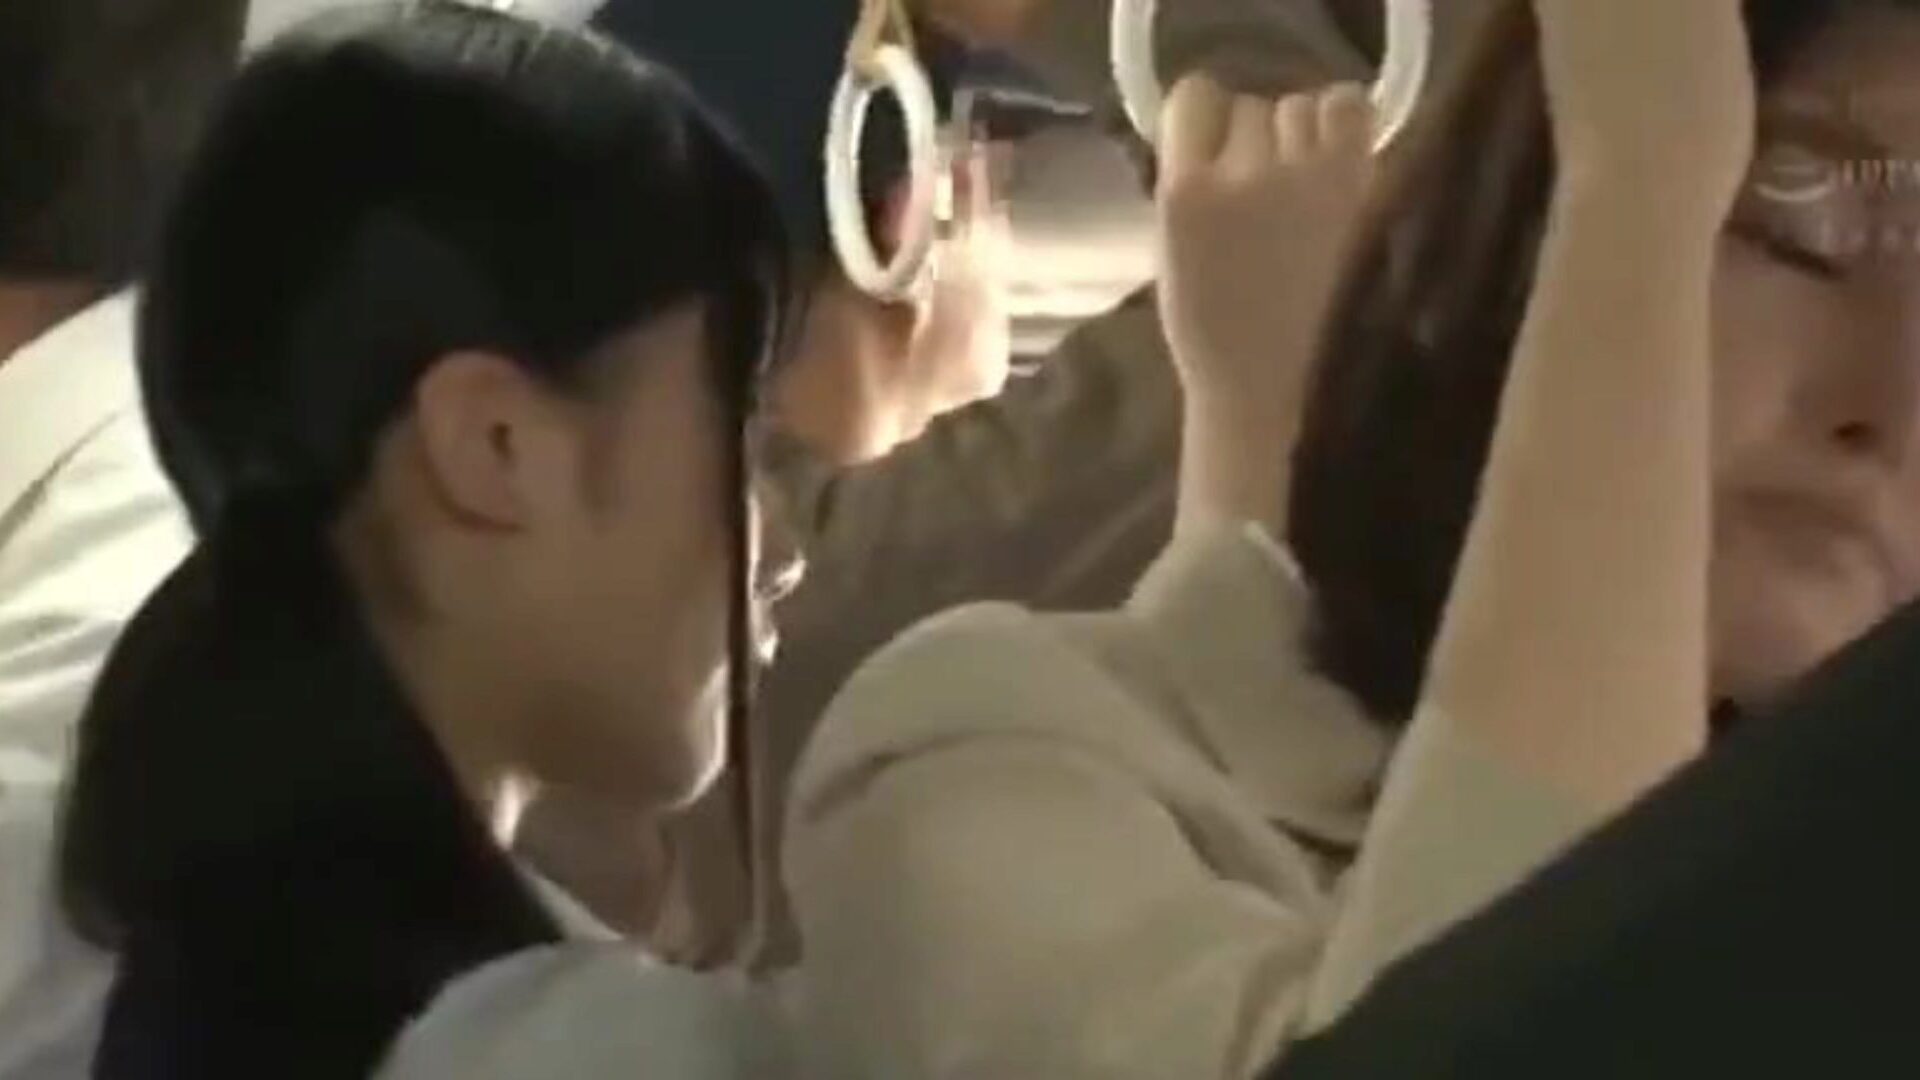 Japanese Schoolgirl Searches for her Prey on Bus